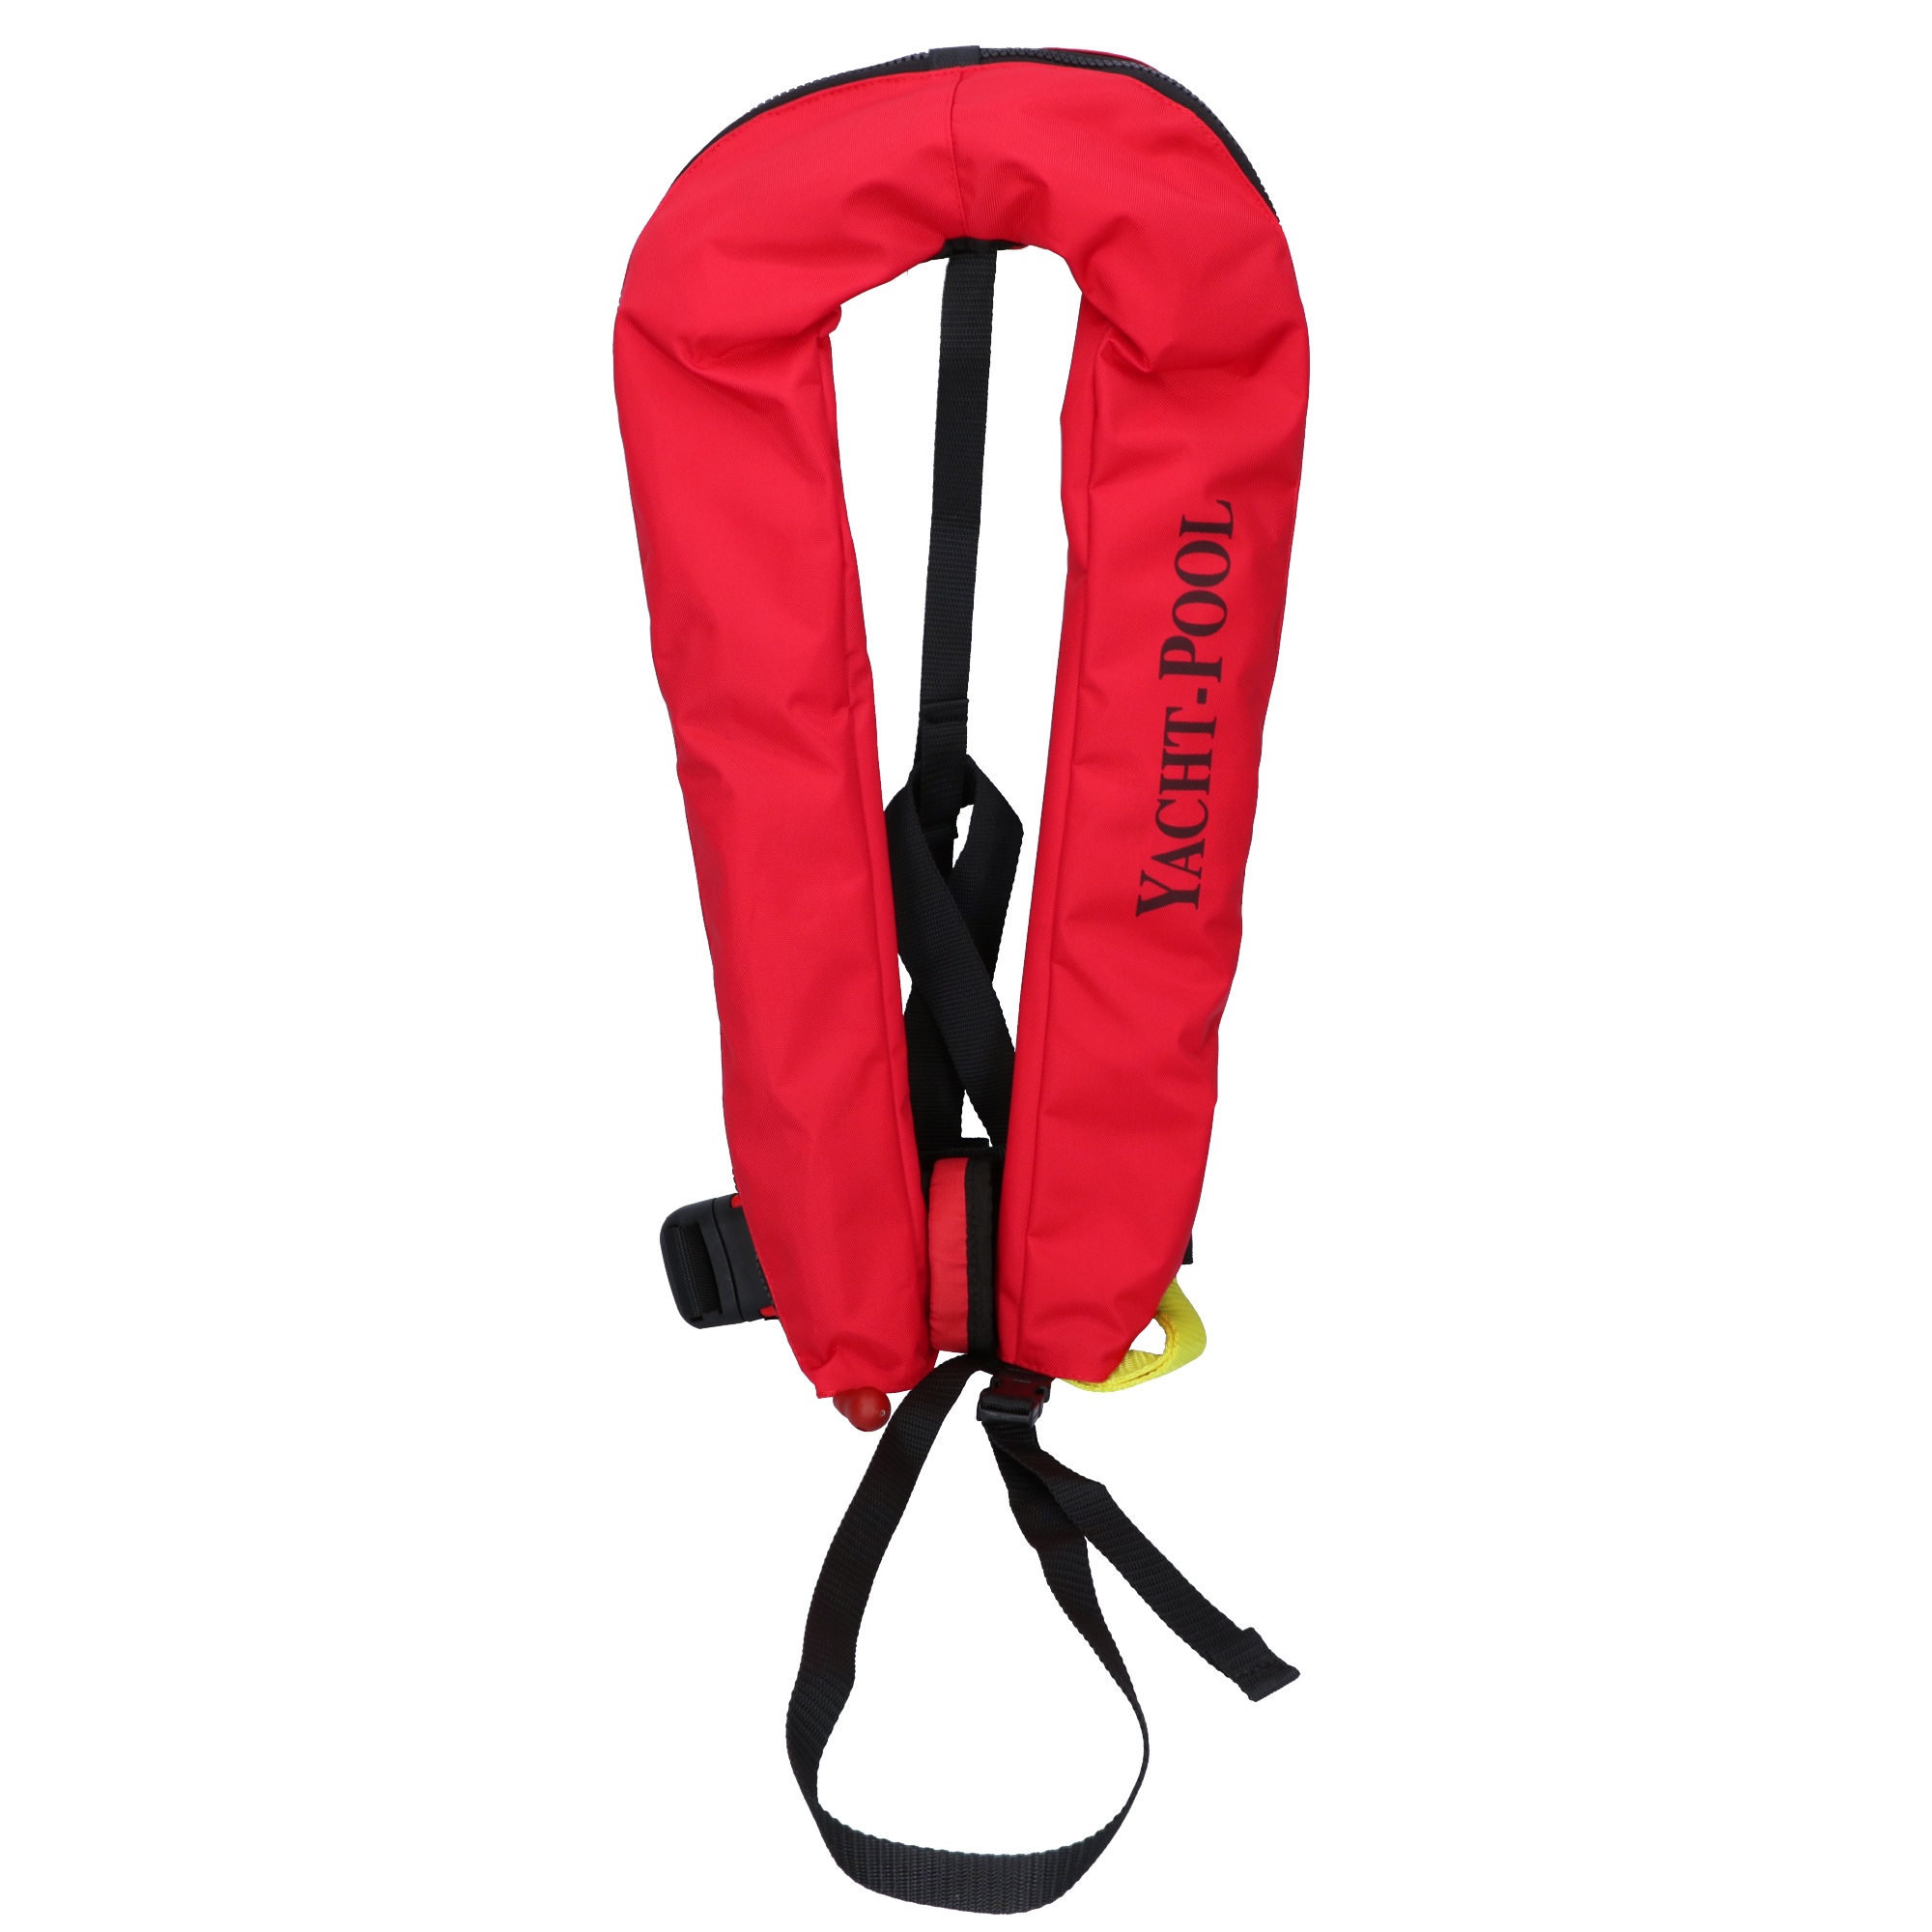 YACHT-POOL fully automatic life jacket 150 N  with waist belt